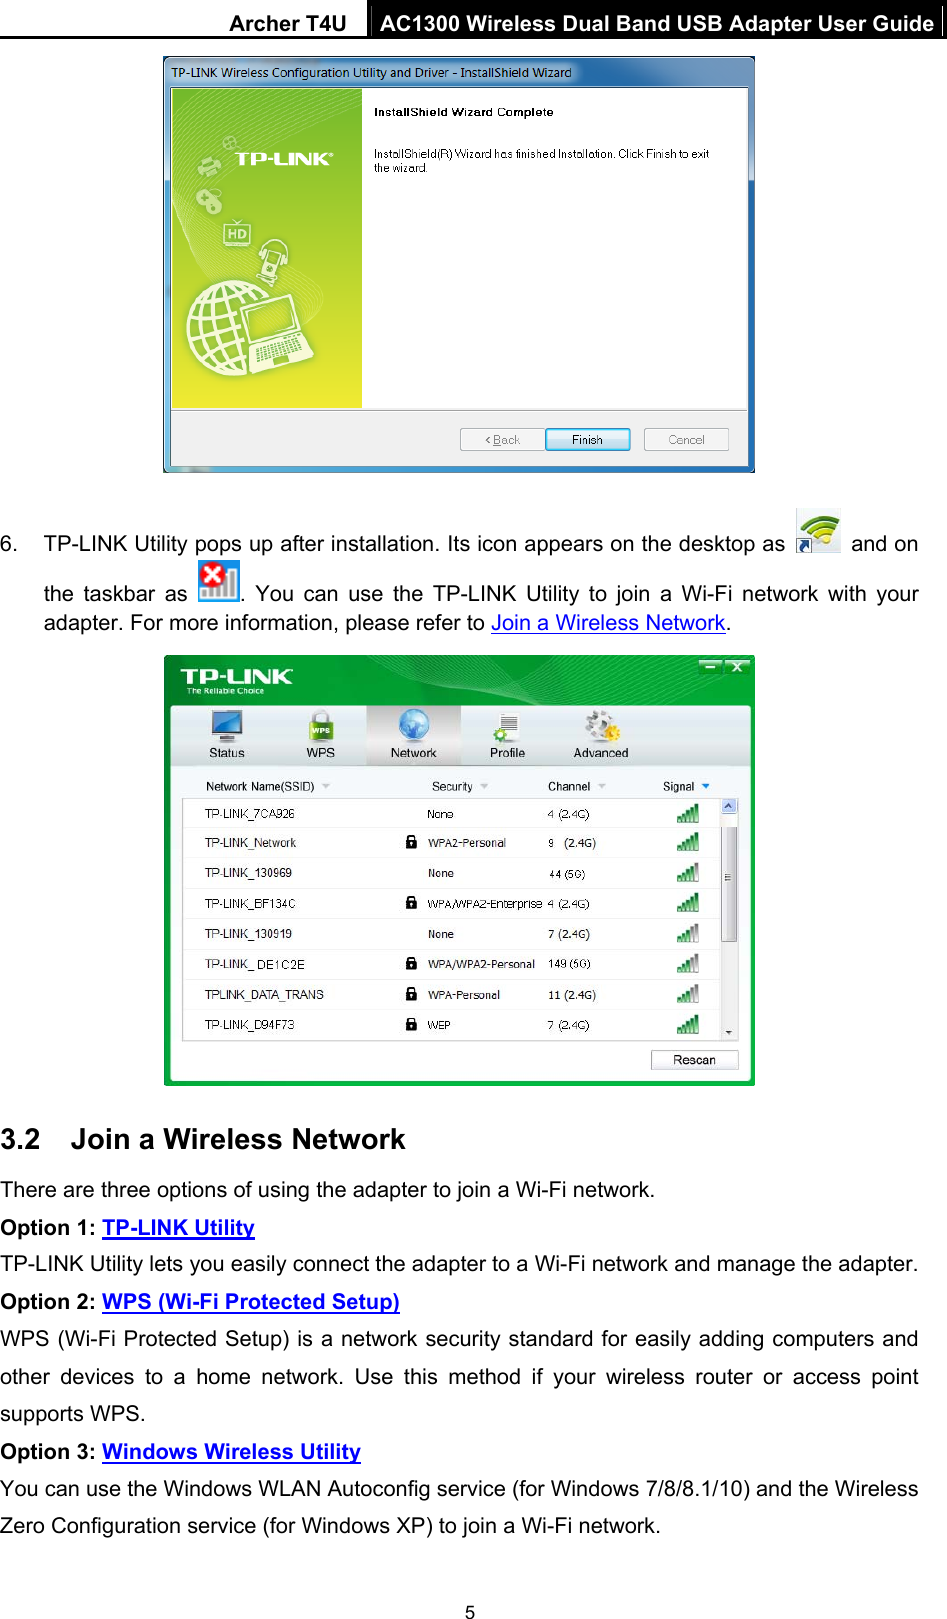 Archer T4U  AC1300 Wireless Dual Band USB Adapter User Guide 5   6.  TP-LINK Utility pops up after installation. Its icon appears on the desktop as   and on the taskbar as  . You can use the TP-LINK Utility to join a Wi-Fi network with your adapter. For more information, please refer to Join a Wireless Network.  3.2  Join a Wireless Network There are three options of using the adapter to join a Wi-Fi network. Option 1: TP-LINK Utility TP-LINK Utility lets you easily connect the adapter to a Wi-Fi network and manage the adapter.   Option 2: WPS (Wi-Fi Protected Setup) WPS (Wi-Fi Protected Setup) is a network security standard for easily adding computers and other devices to a home network. Use this method if your wireless router or access point supports WPS. Option 3: Windows Wireless Utility You can use the Windows WLAN Autoconfig service (for Windows 7/8/8.1/10) and the Wireless Zero Configuration service (for Windows XP) to join a Wi-Fi network. 